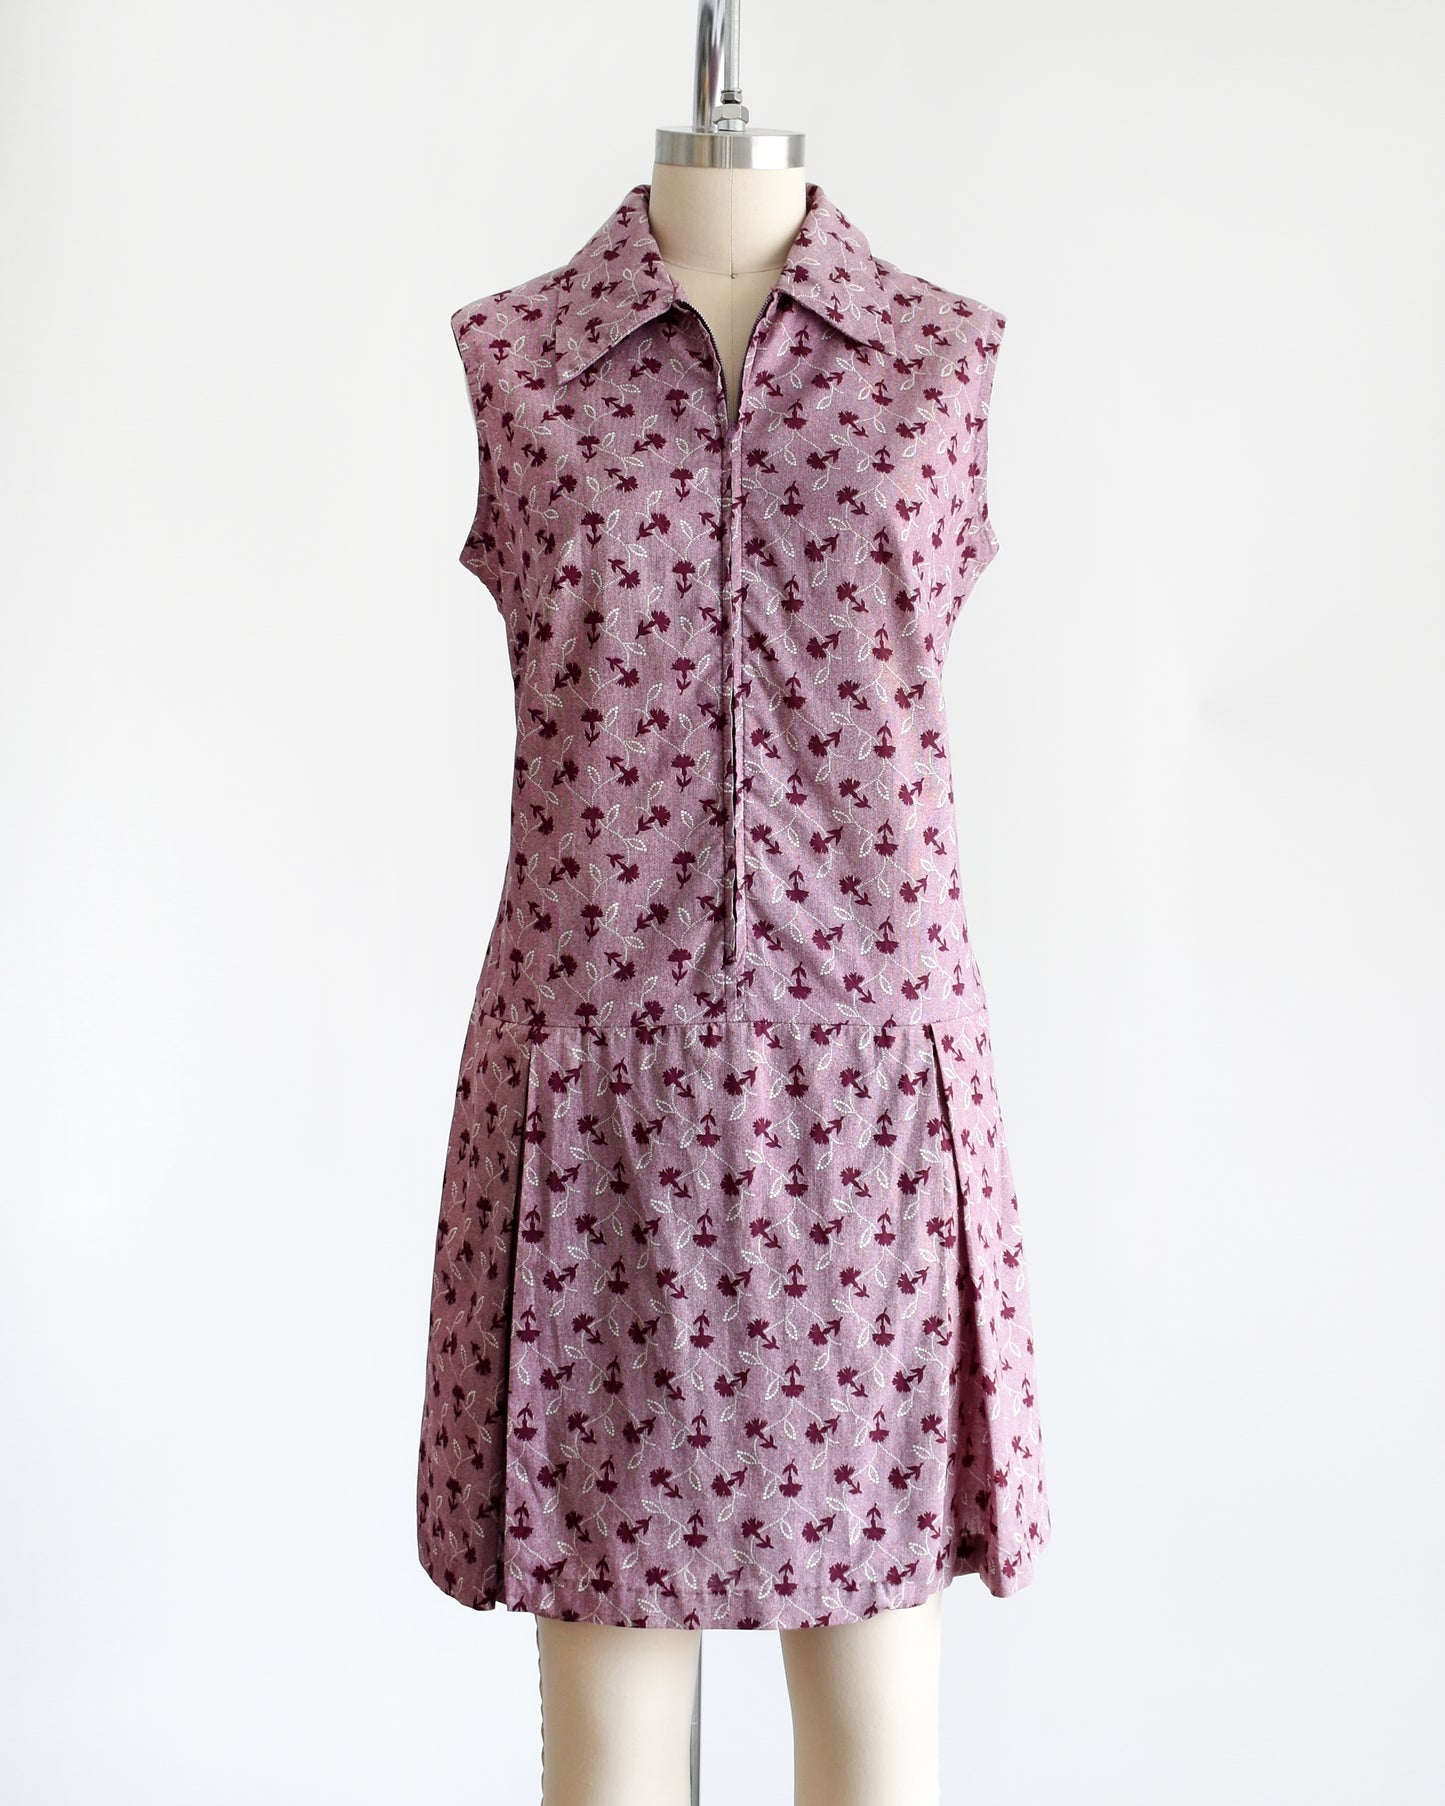 This 1970s vintage romper features a cute purple and white floral print, a collared neckline, and a metal zipper closure down the front. The zipper is unzipped slightly in this photo.